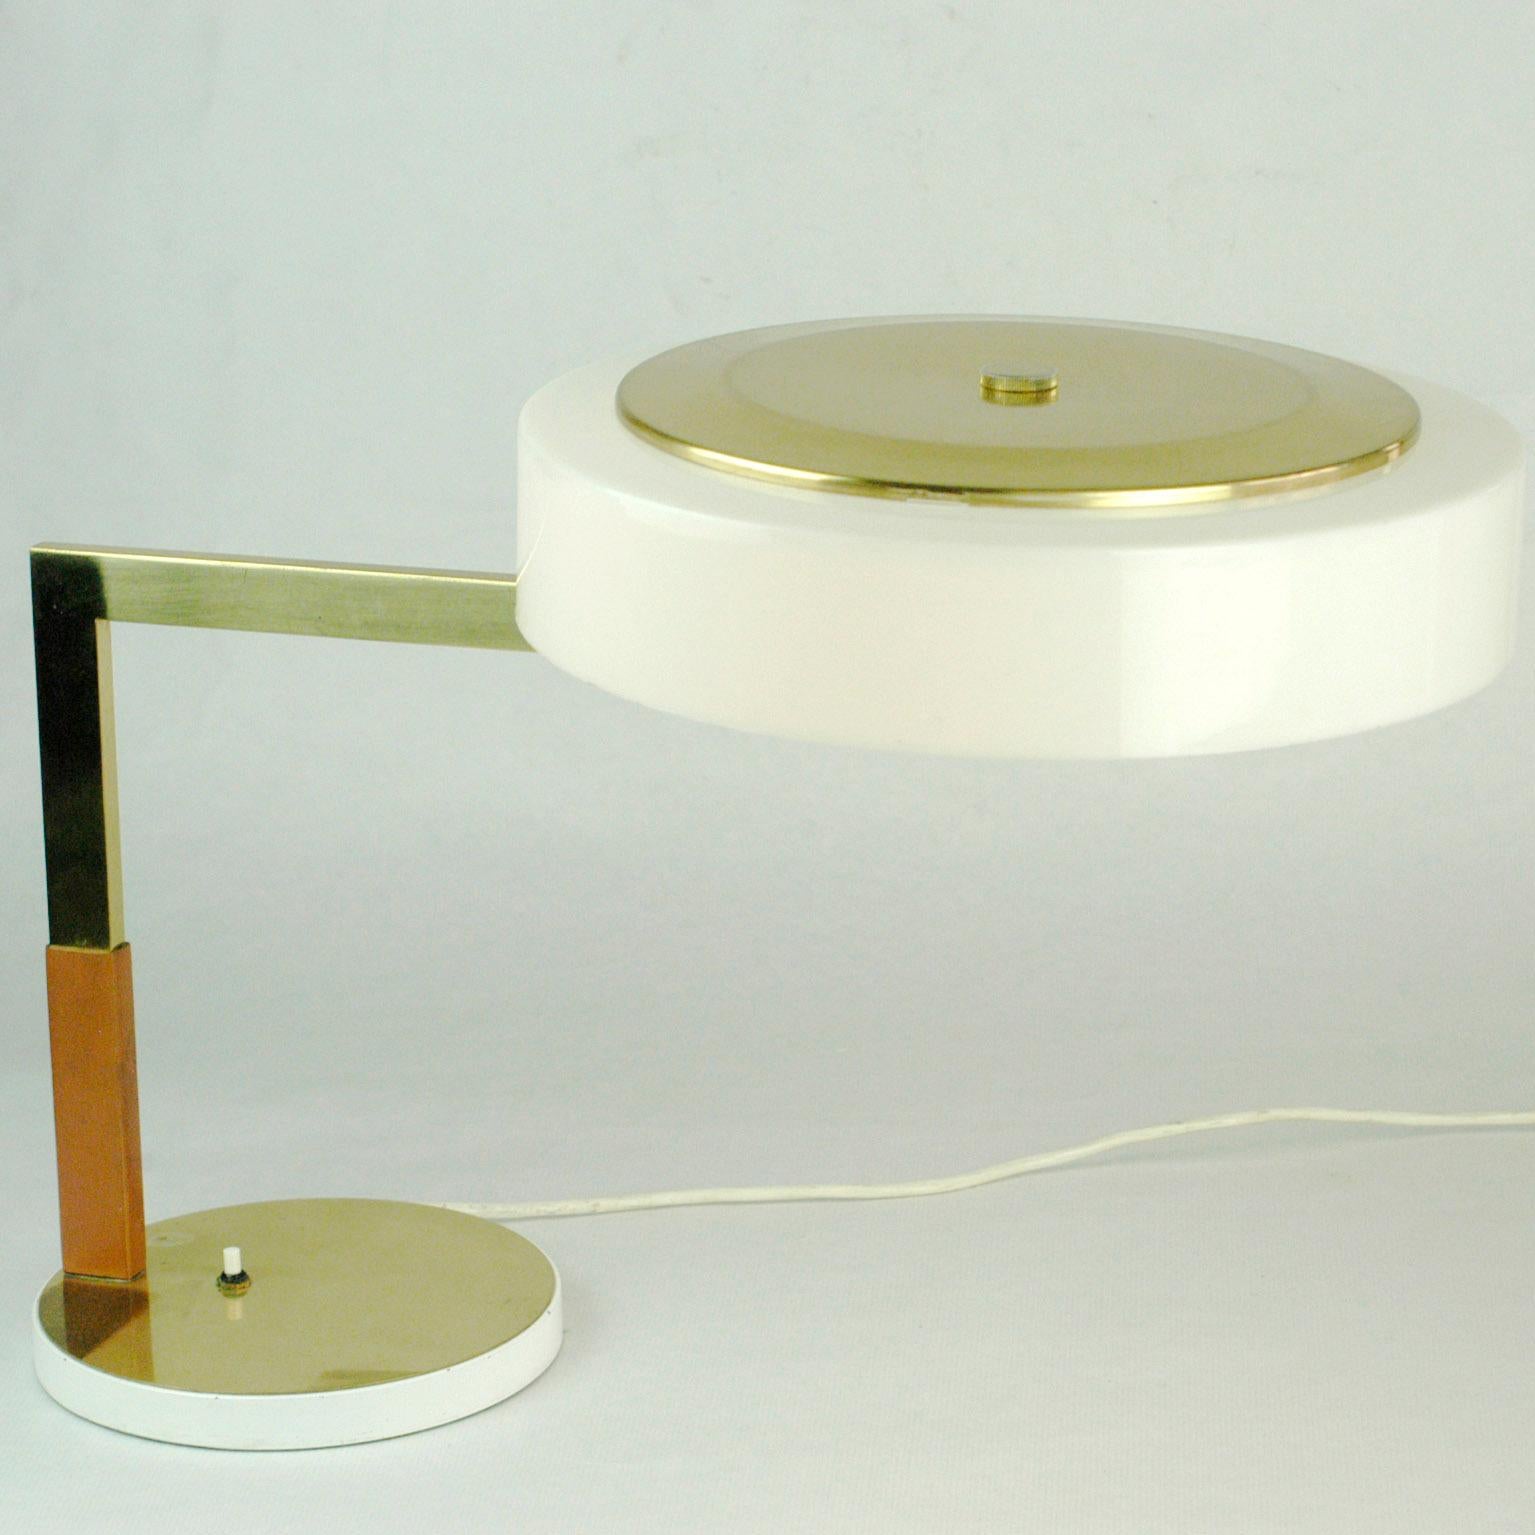 This excellent Austrian midcentury desk lamp with adjustable shade was designed and manufactured by J.T. Kalmar Vienna in the 1960s. It features a brass stem with leather and an acrylic adjustable shade. It has one E27 light socket and is fully